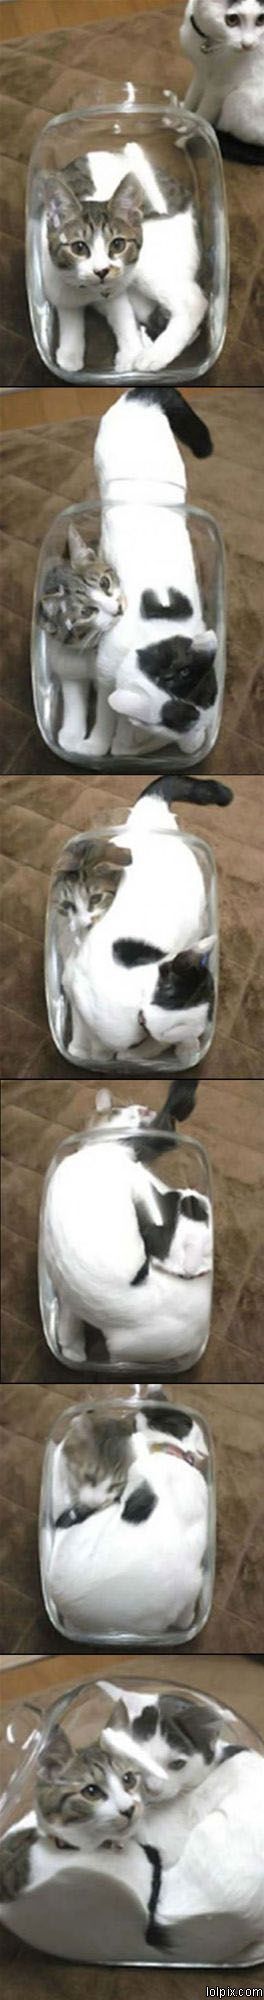 cats in a jar